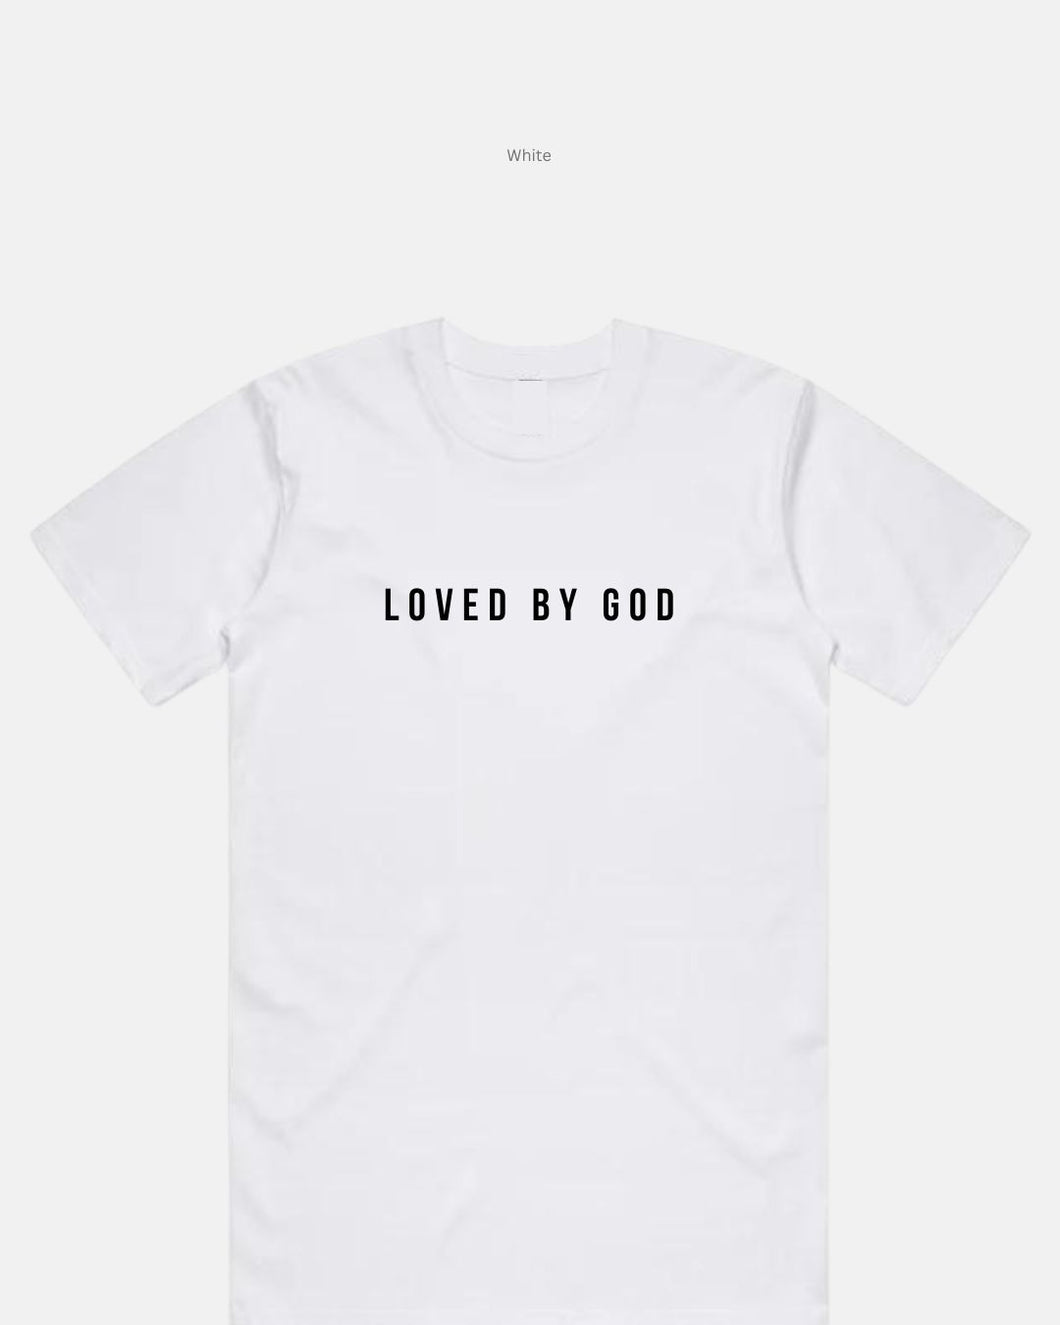 LOVED BY GOD